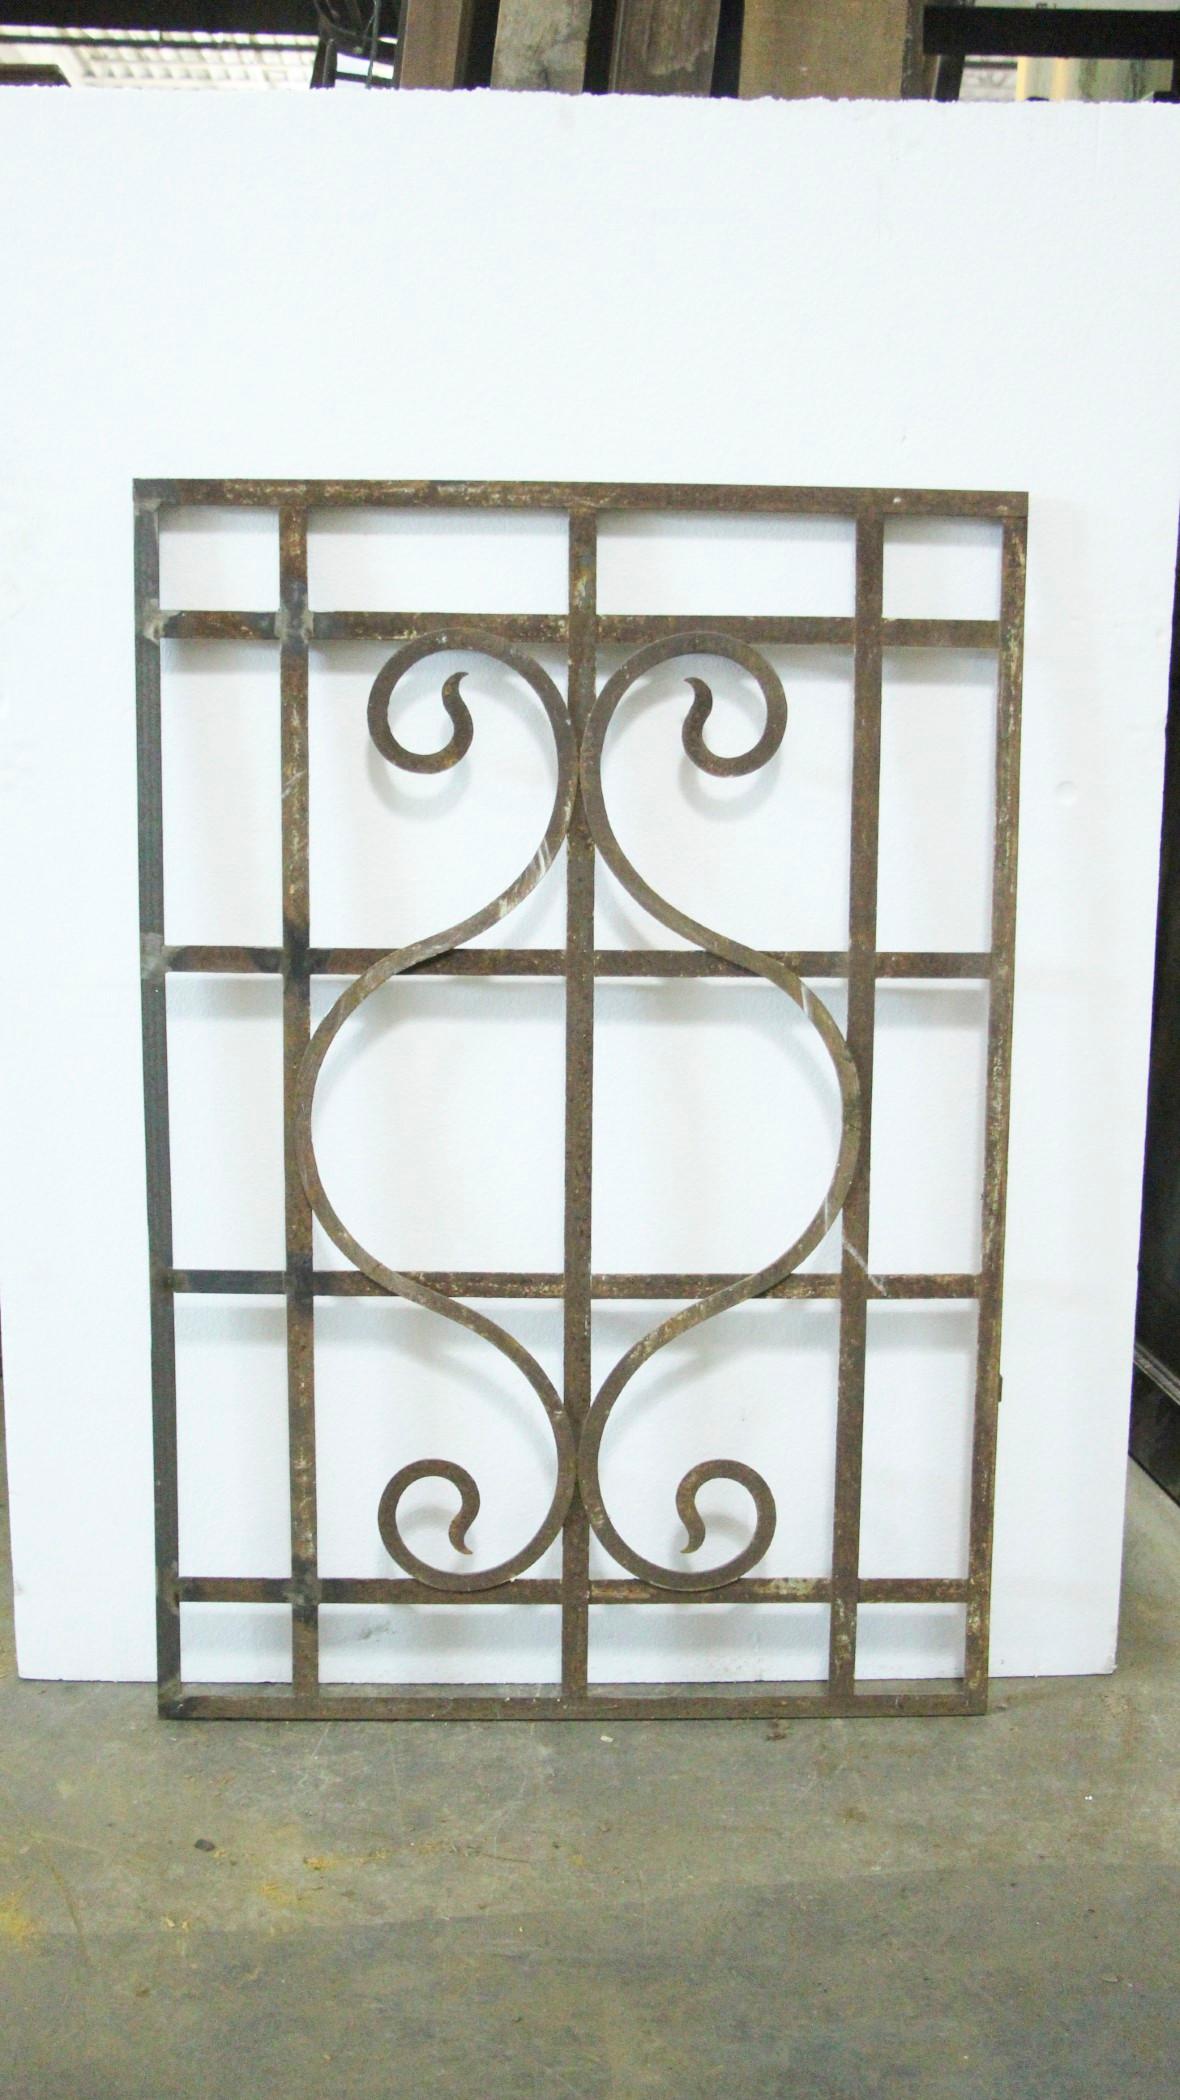 1920s antique wrought iron window guard or grill. Hand wrought and hand forged. This can be seen at our 400 Gilligan St location in Scranton, PA. Measures: 50.5 inches x 34.75 inches.